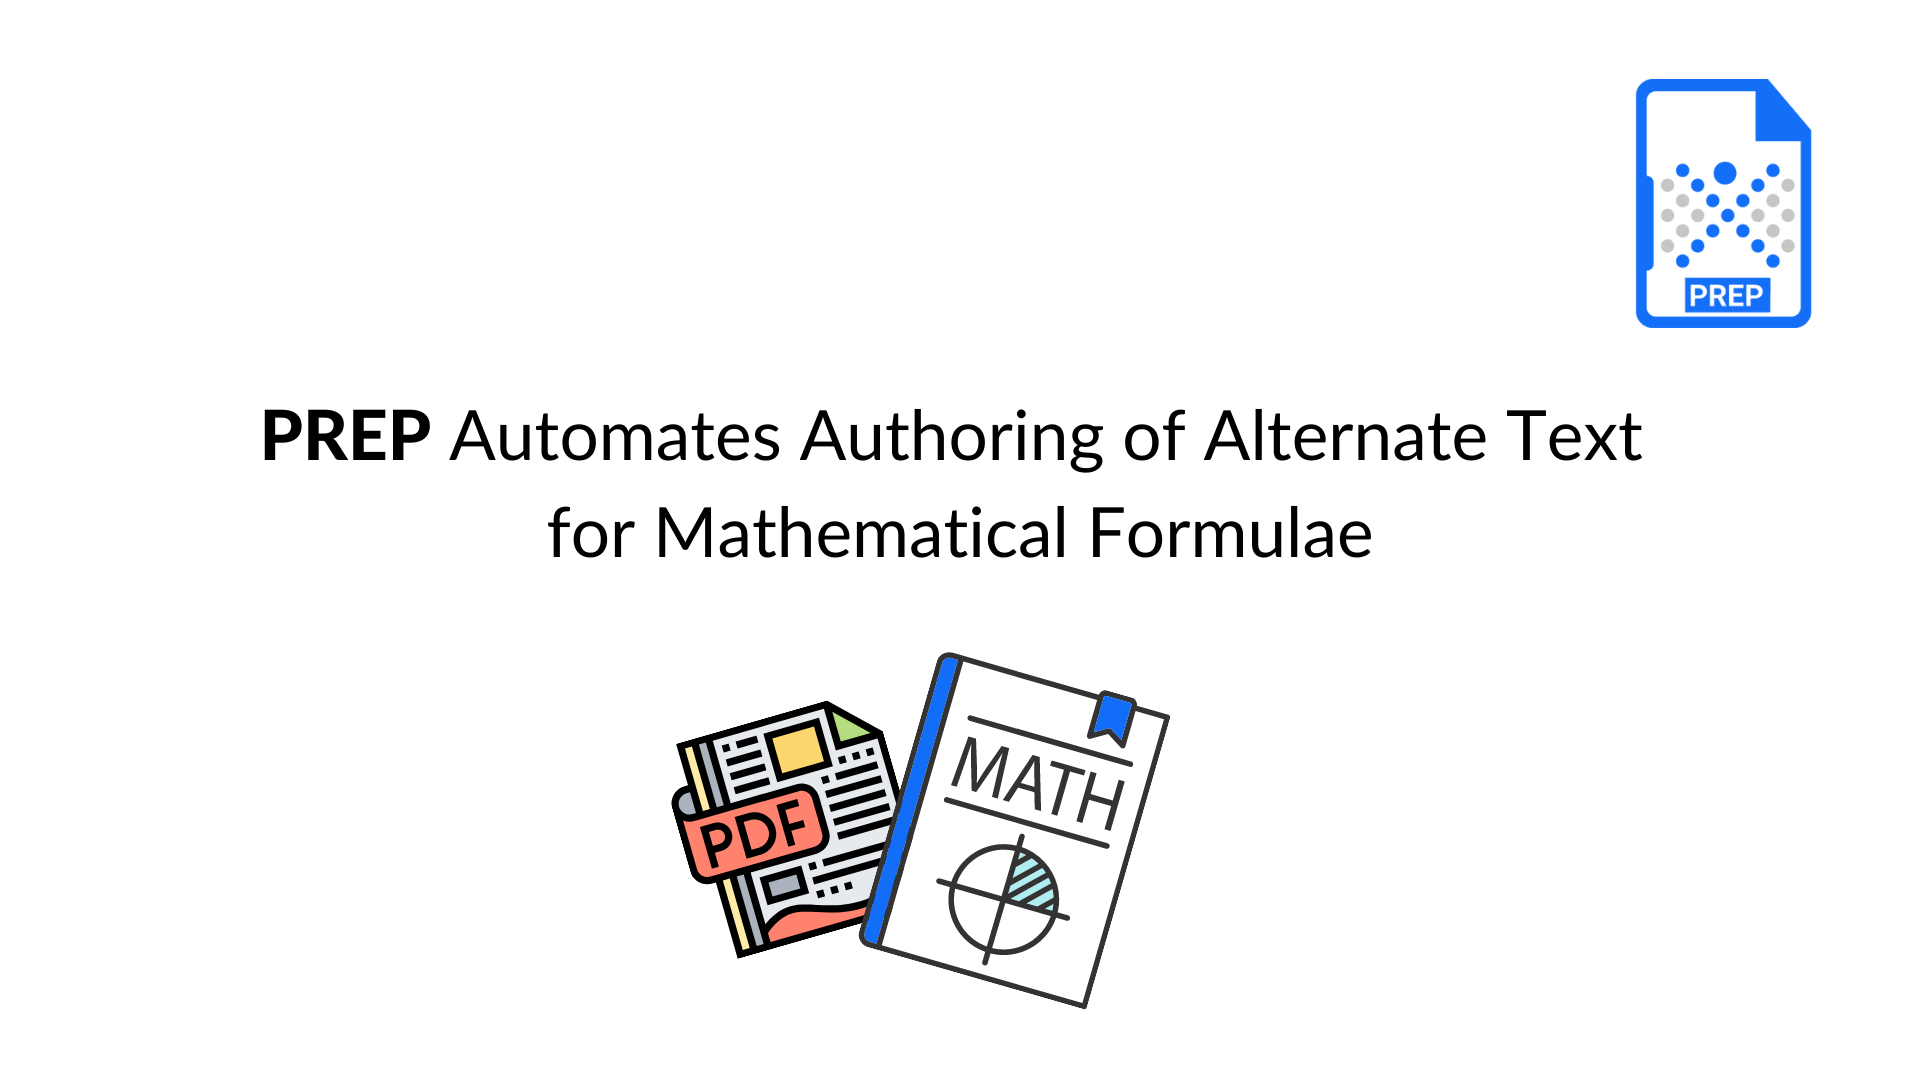 PREP Automates Authoring of Alternate Text for Mathematical Formulae